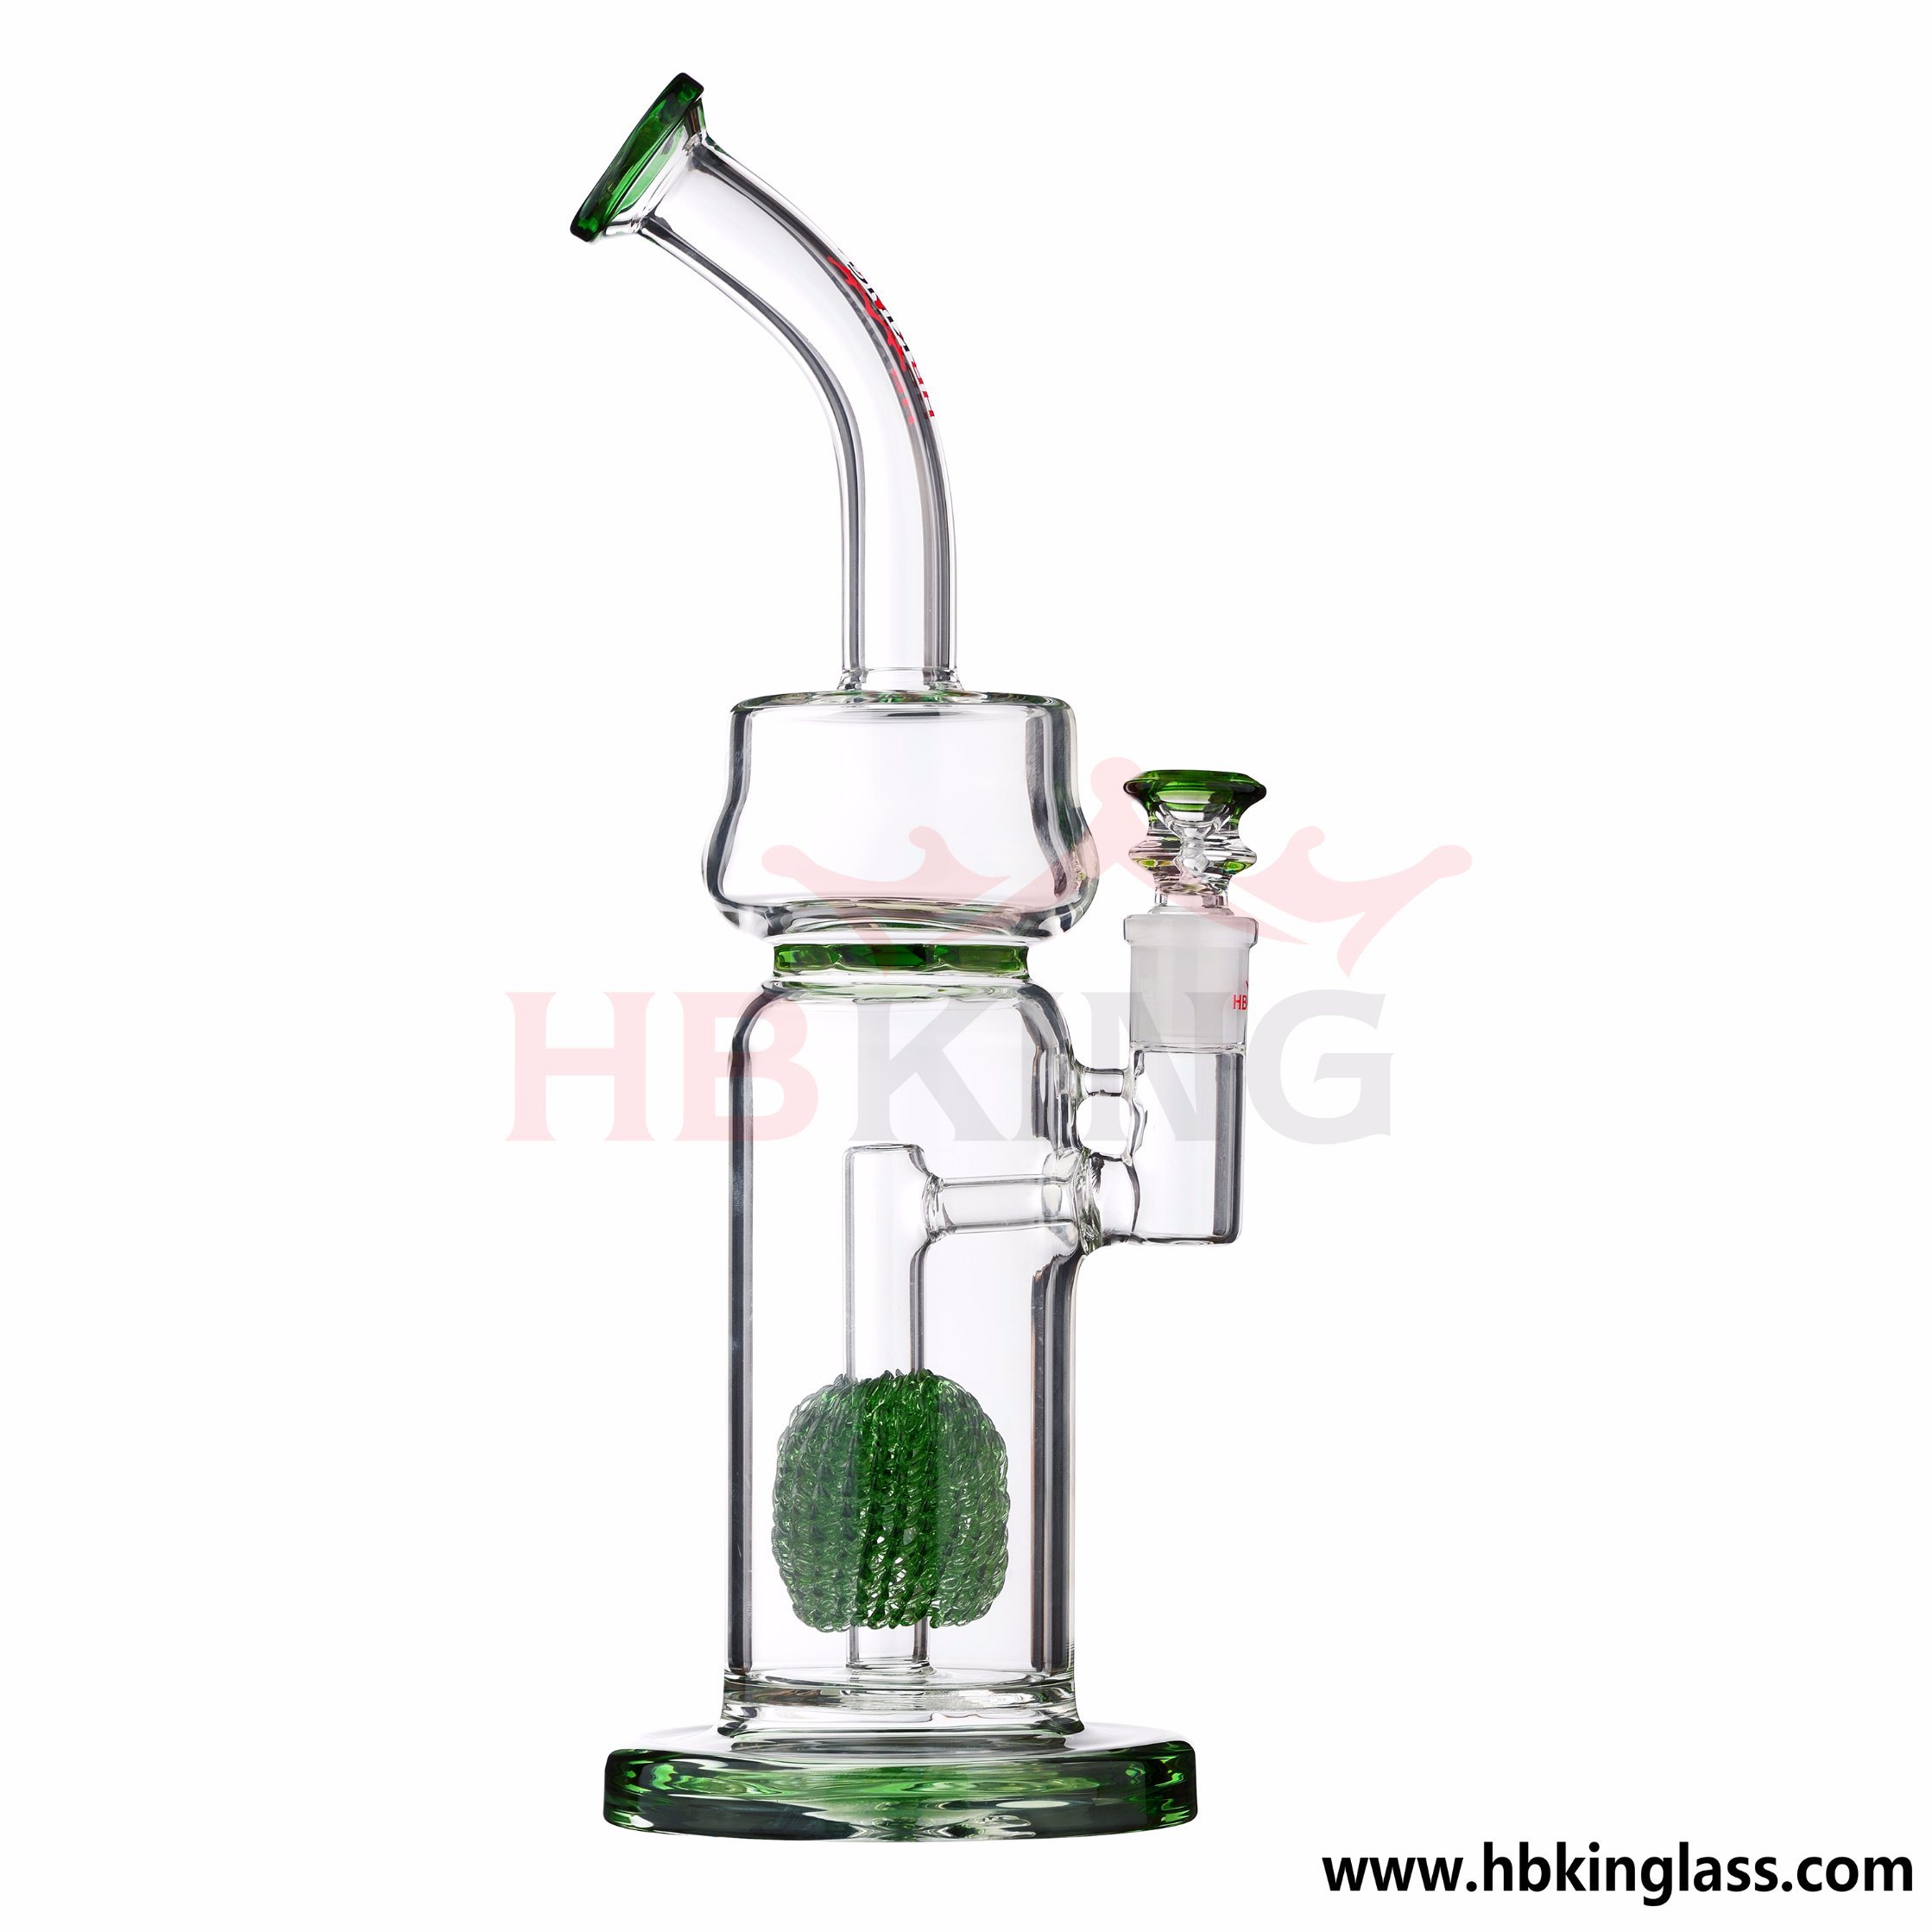 Hbking Factory Crystal Ball Perc to Turbine Perc Glass Water Pipe